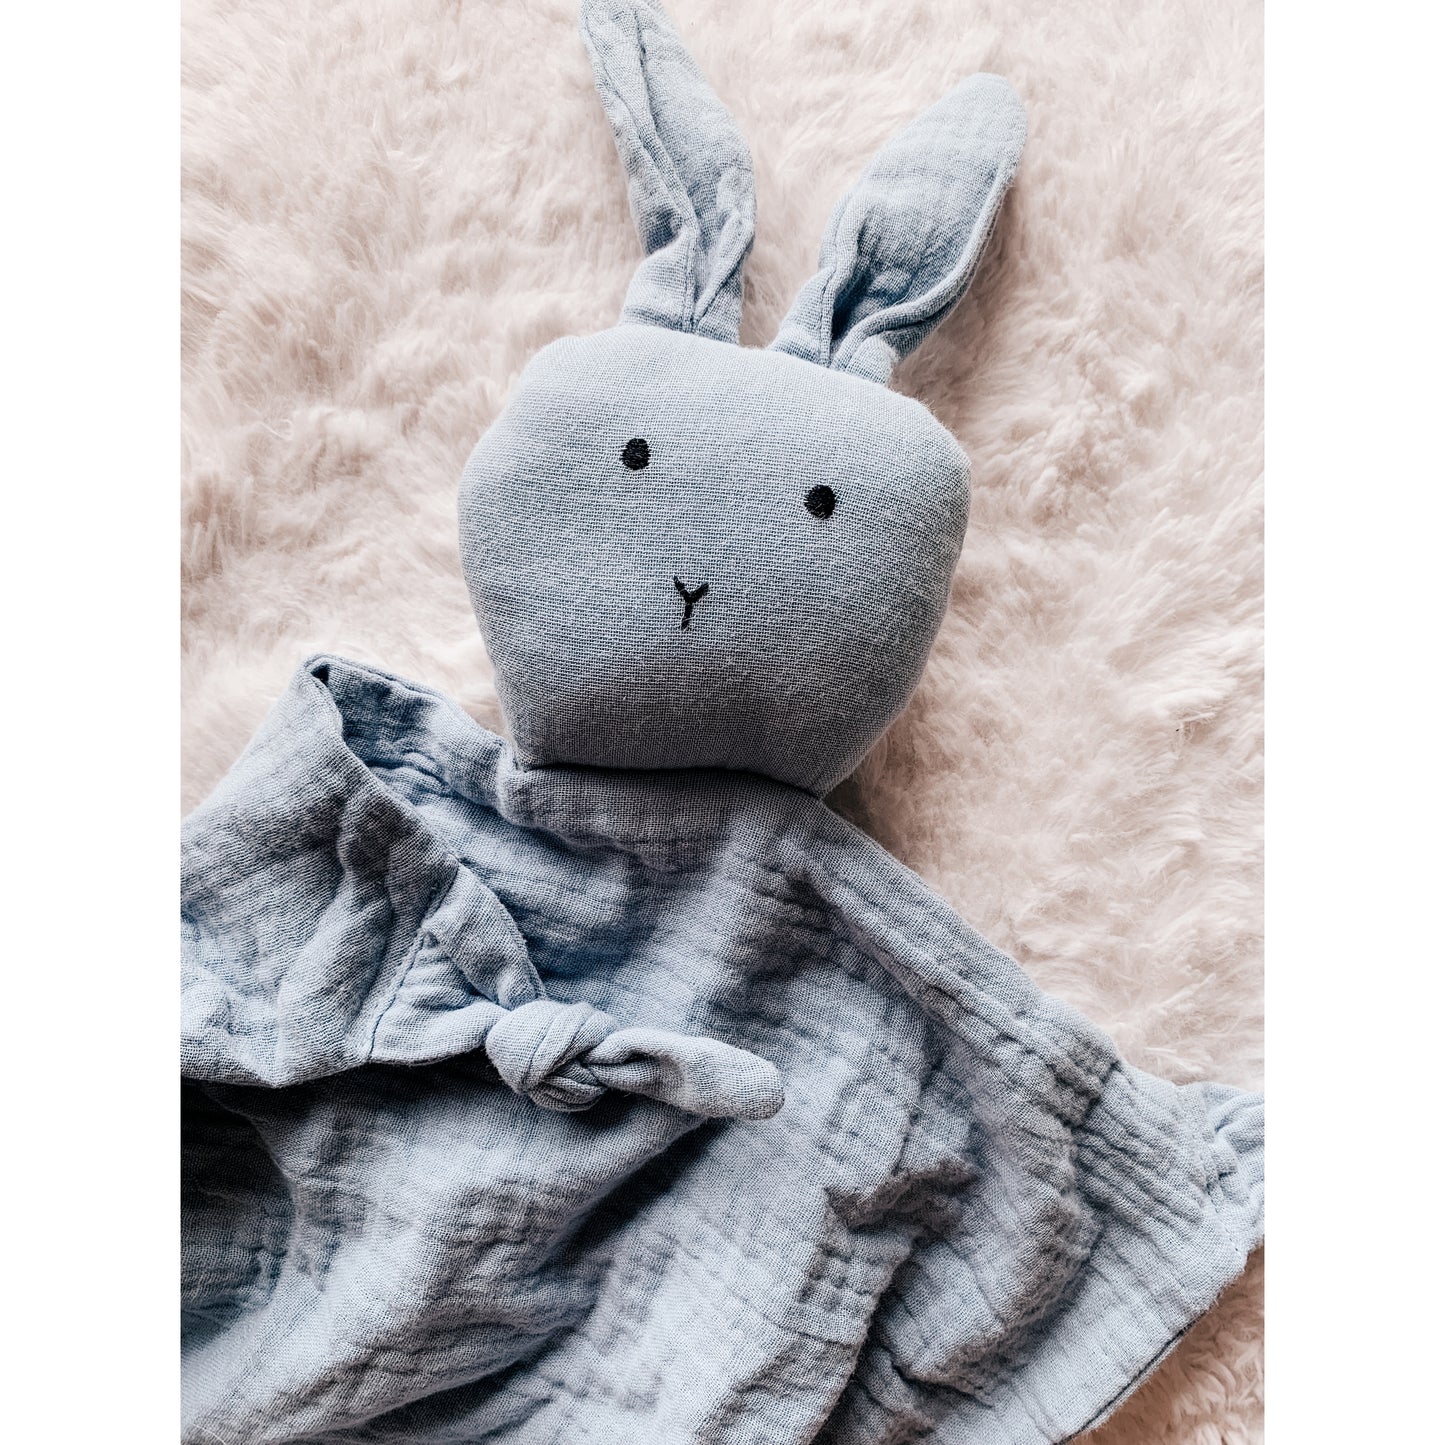 Bunny Lovey - Multiple Colors